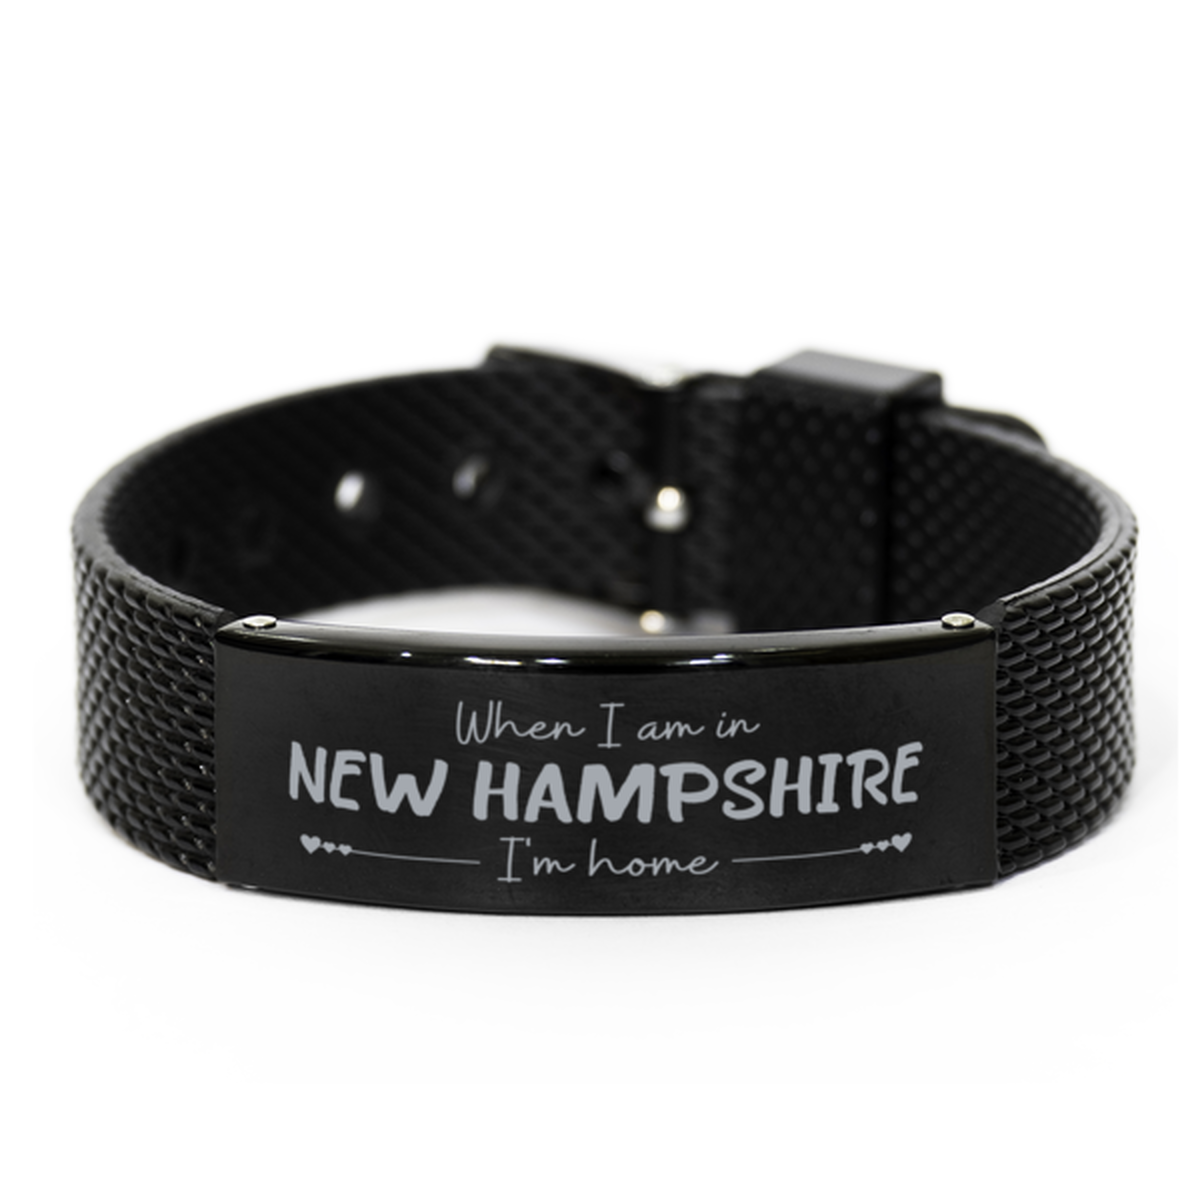 When I am in New Hampshire I'm home Black Shark Mesh Bracelet, Cheap Gifts For New Hampshire, State New Hampshire Birthday Gifts for Friends Coworker